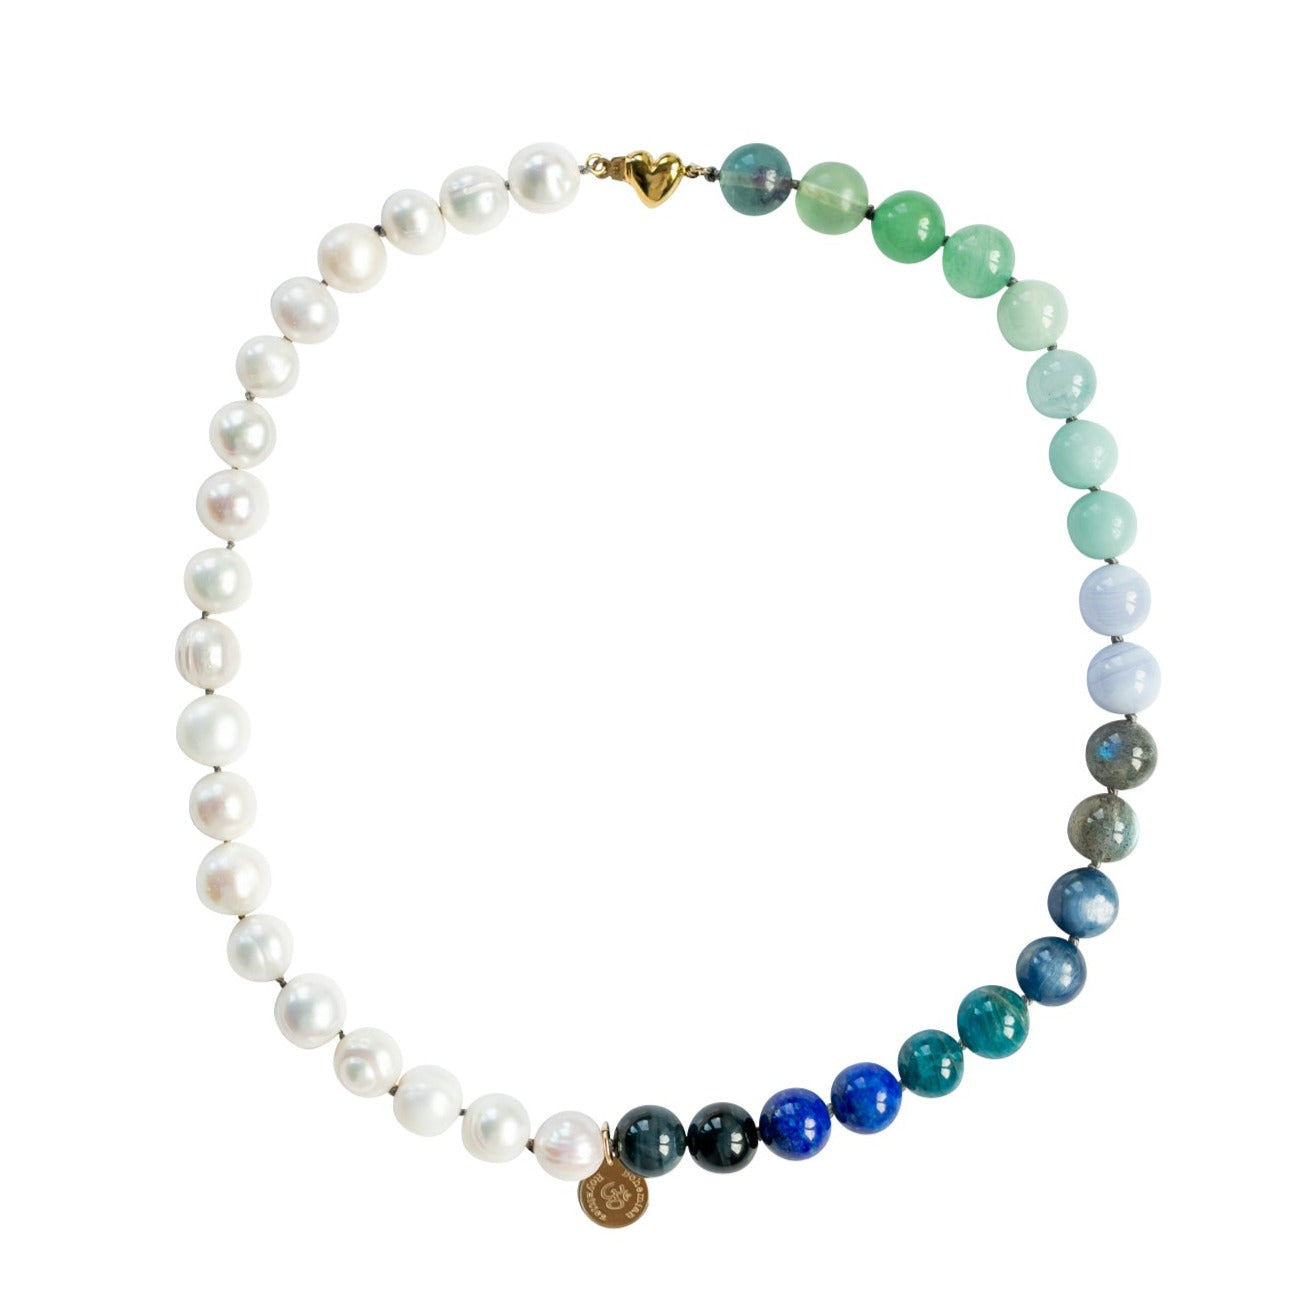 Beaded Pearl Necklace Kit: Locked Heart – Make This Universe